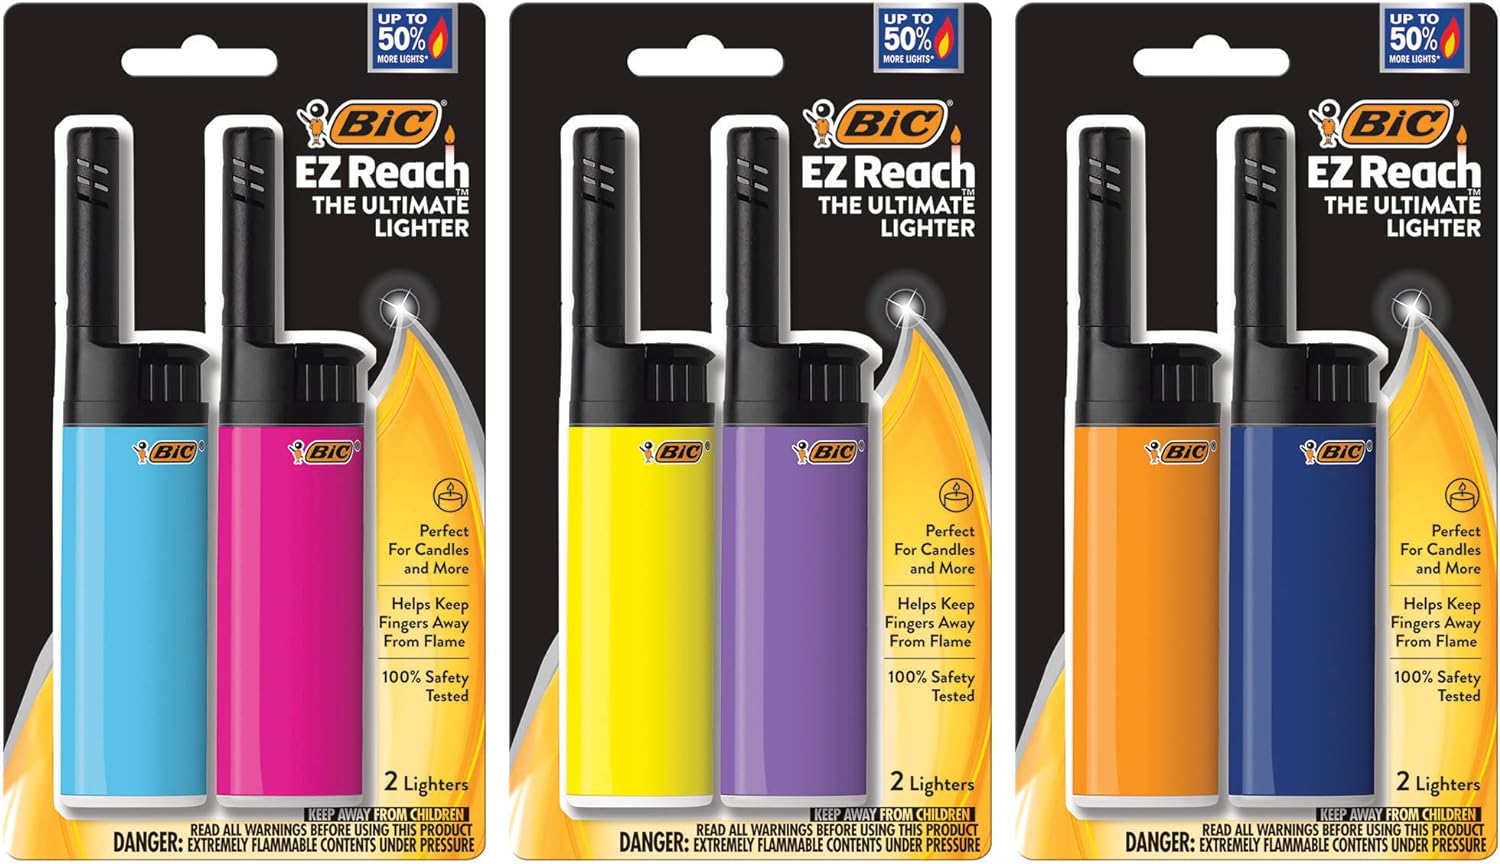 BIC EZ Reach Candle Lighter, The Ultimate Lighter with Wand for Candles, Assorted Designs, 6 Count Pack of Long Lighters